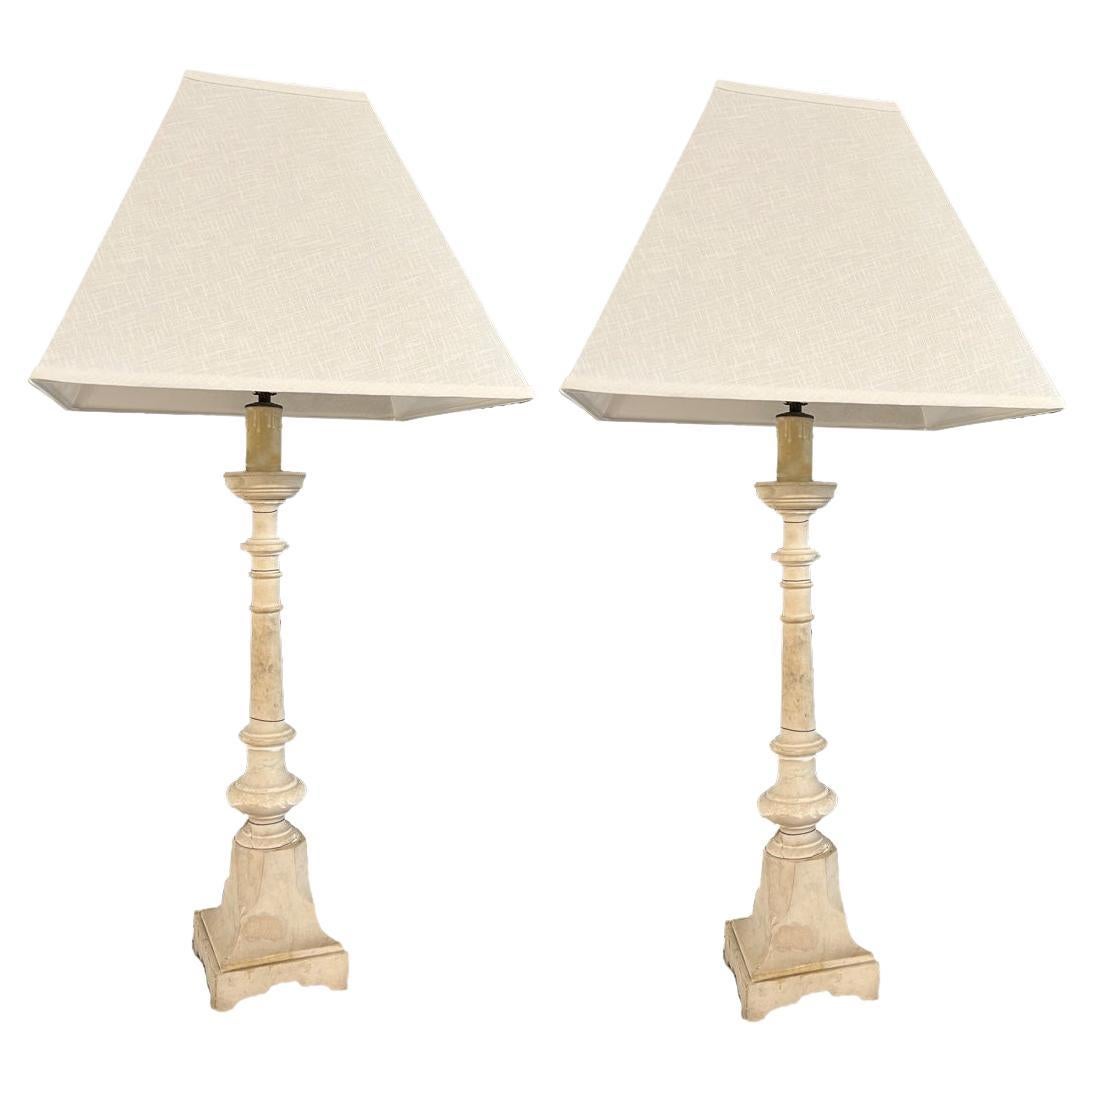 Pair of Marble Lamps, French Vintage, Pale Grey